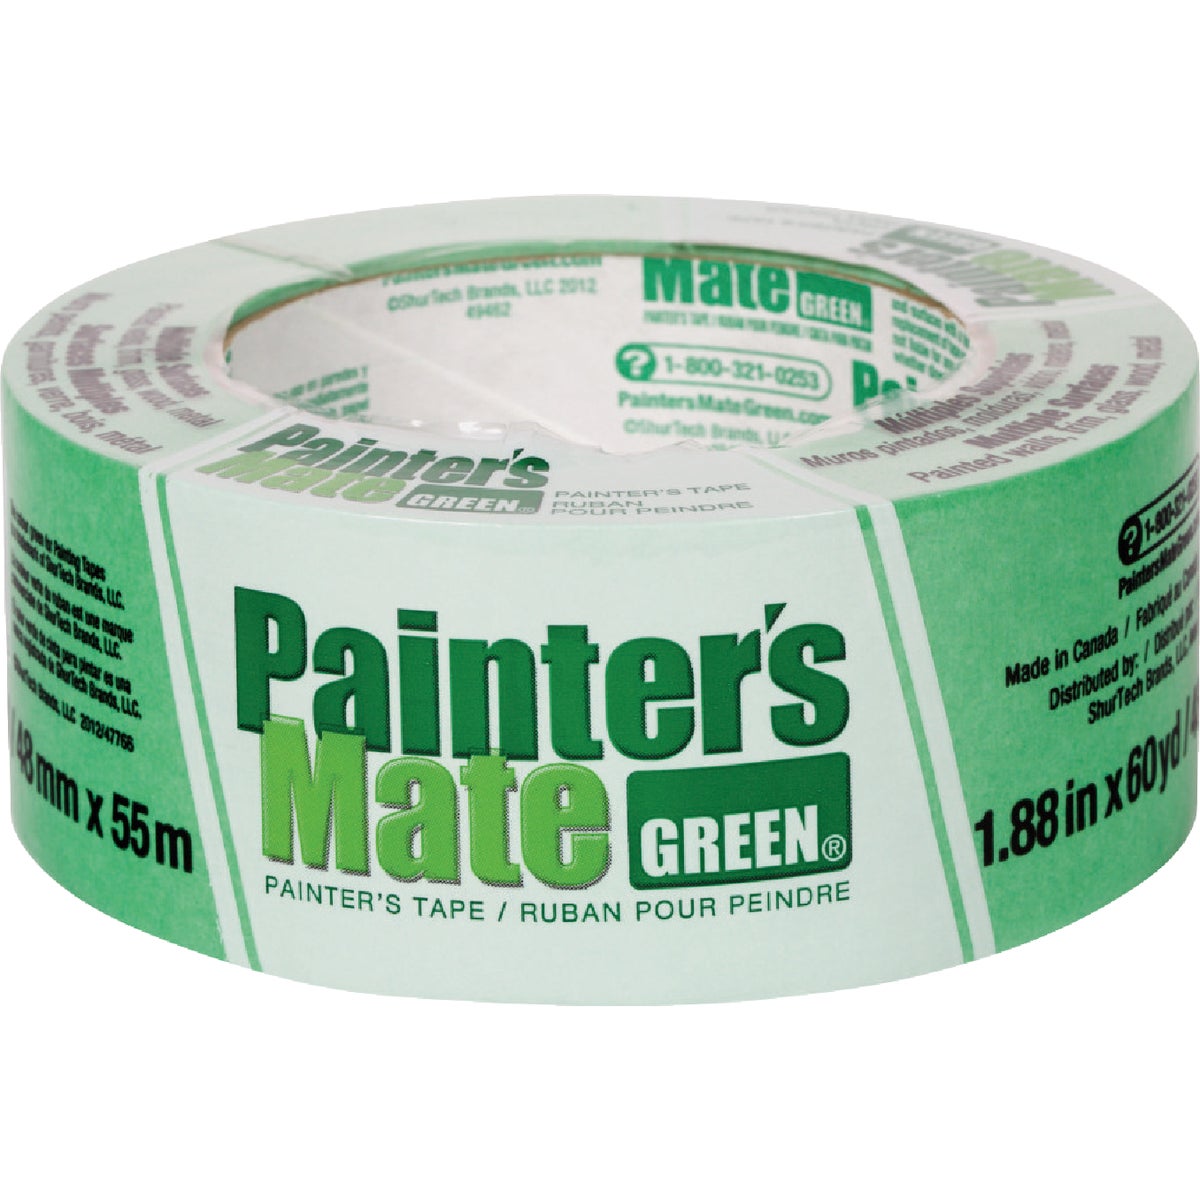 Painter's Mate Green 1.88 In. x 60 Yd. Masking Tape